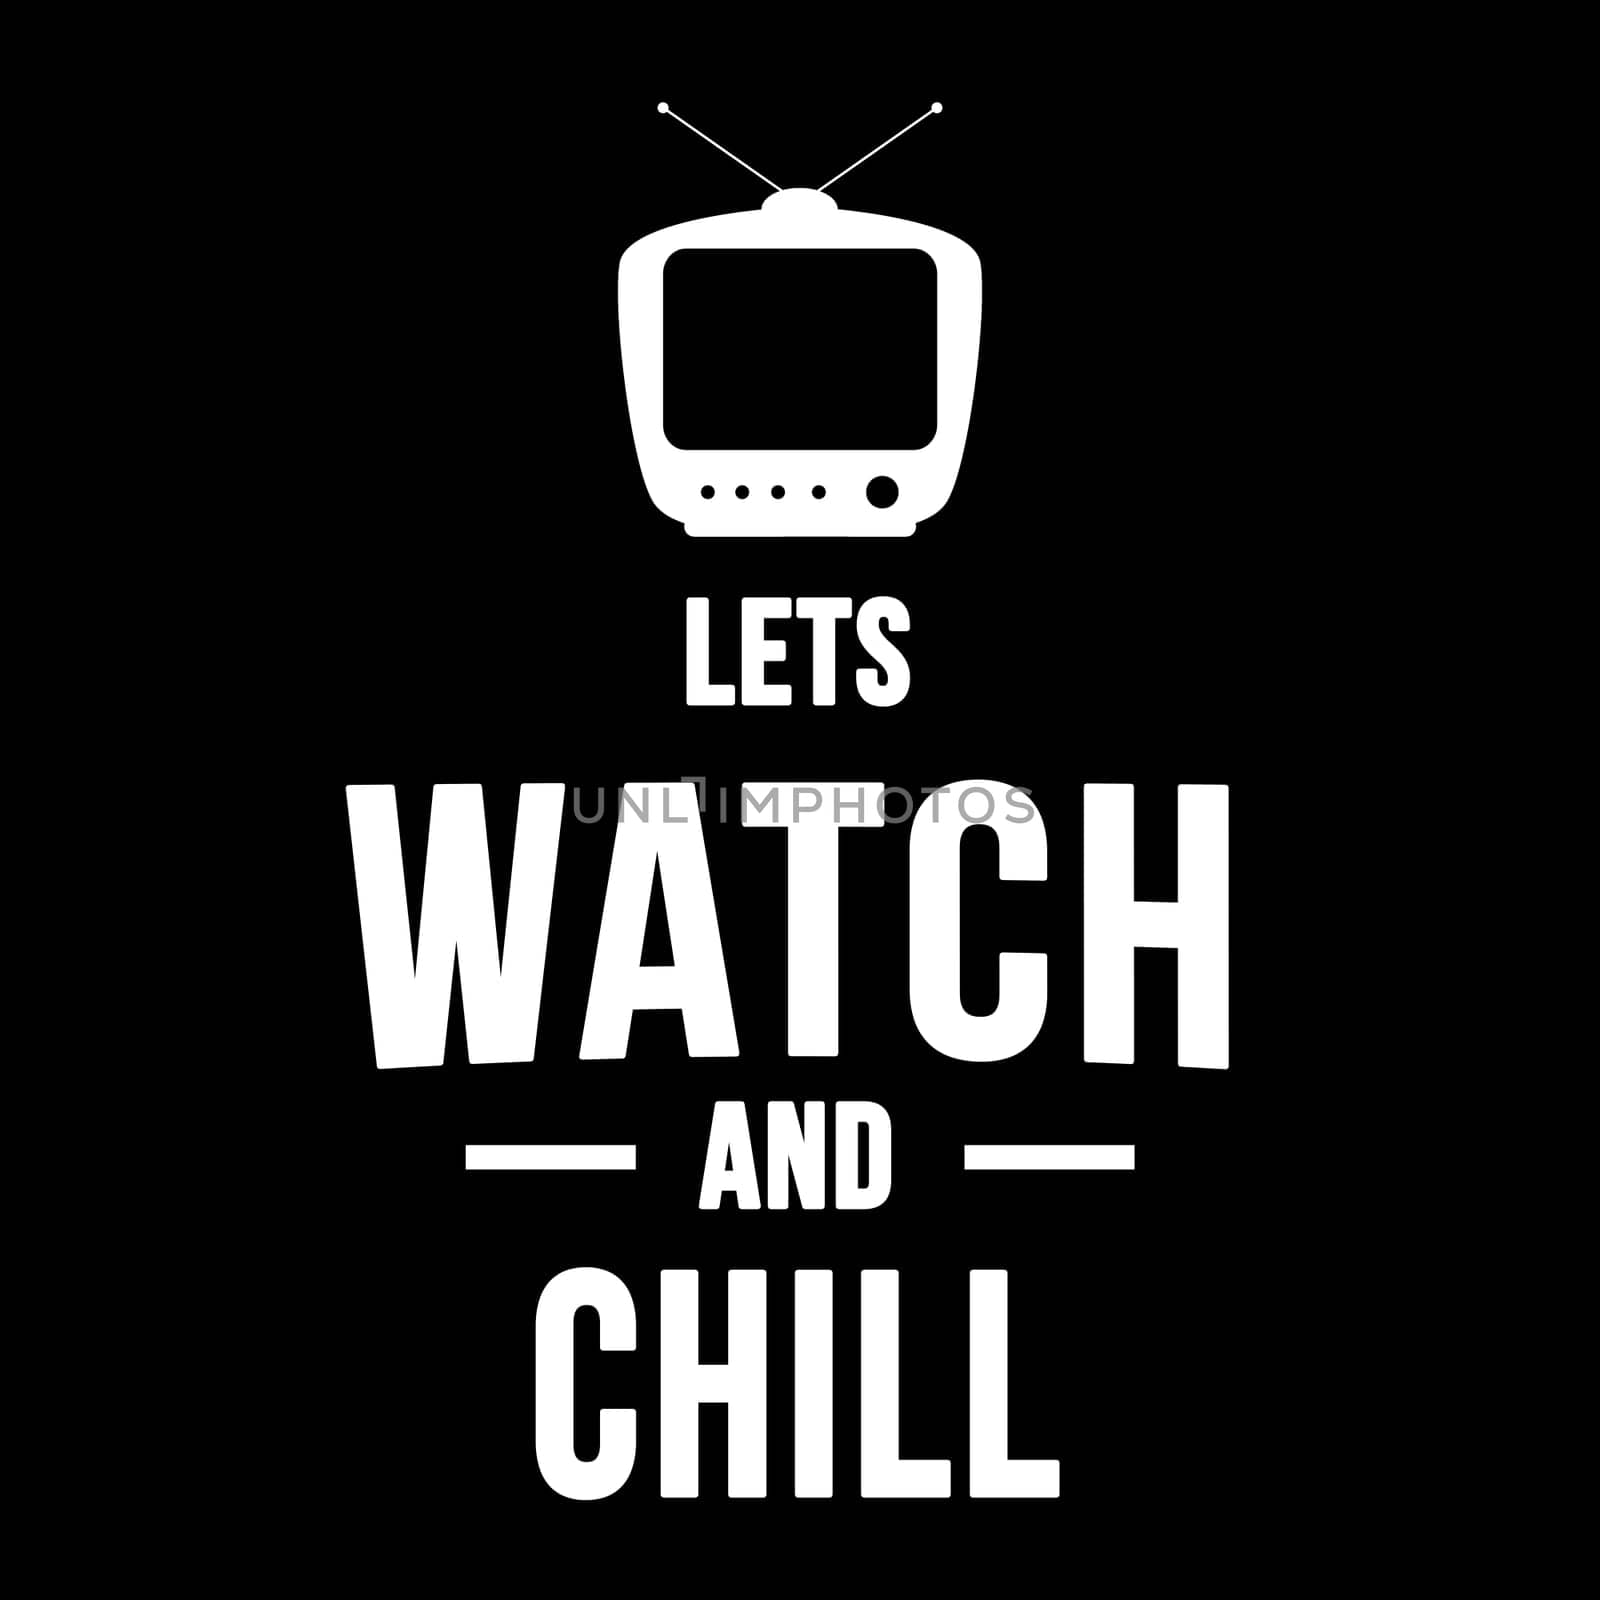 A silhouette television with the text "Lets Watch and Chill".